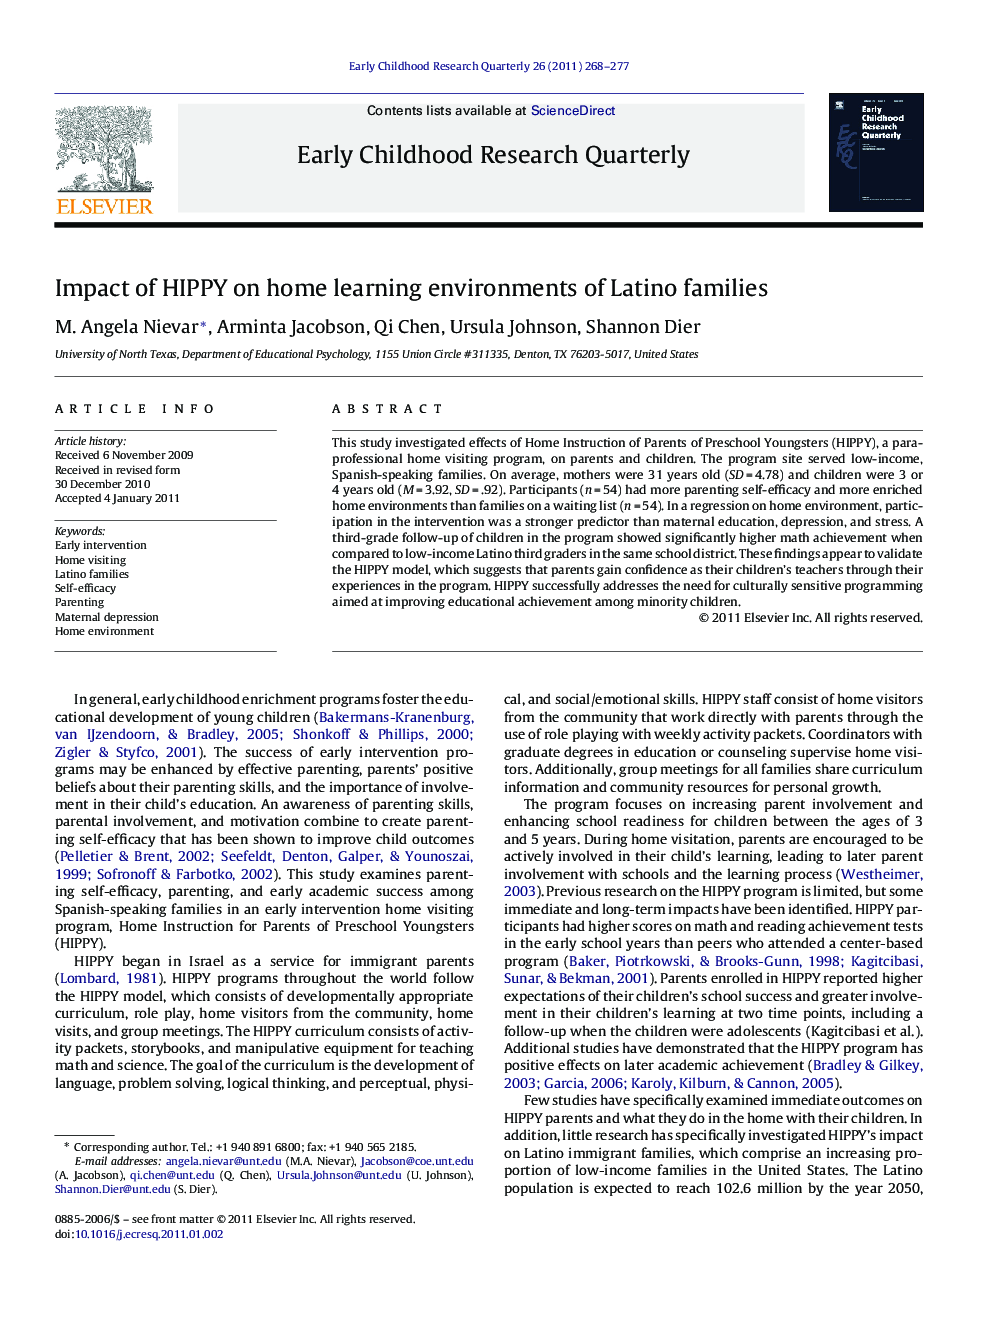 Impact of HIPPY on home learning environments of Latino families